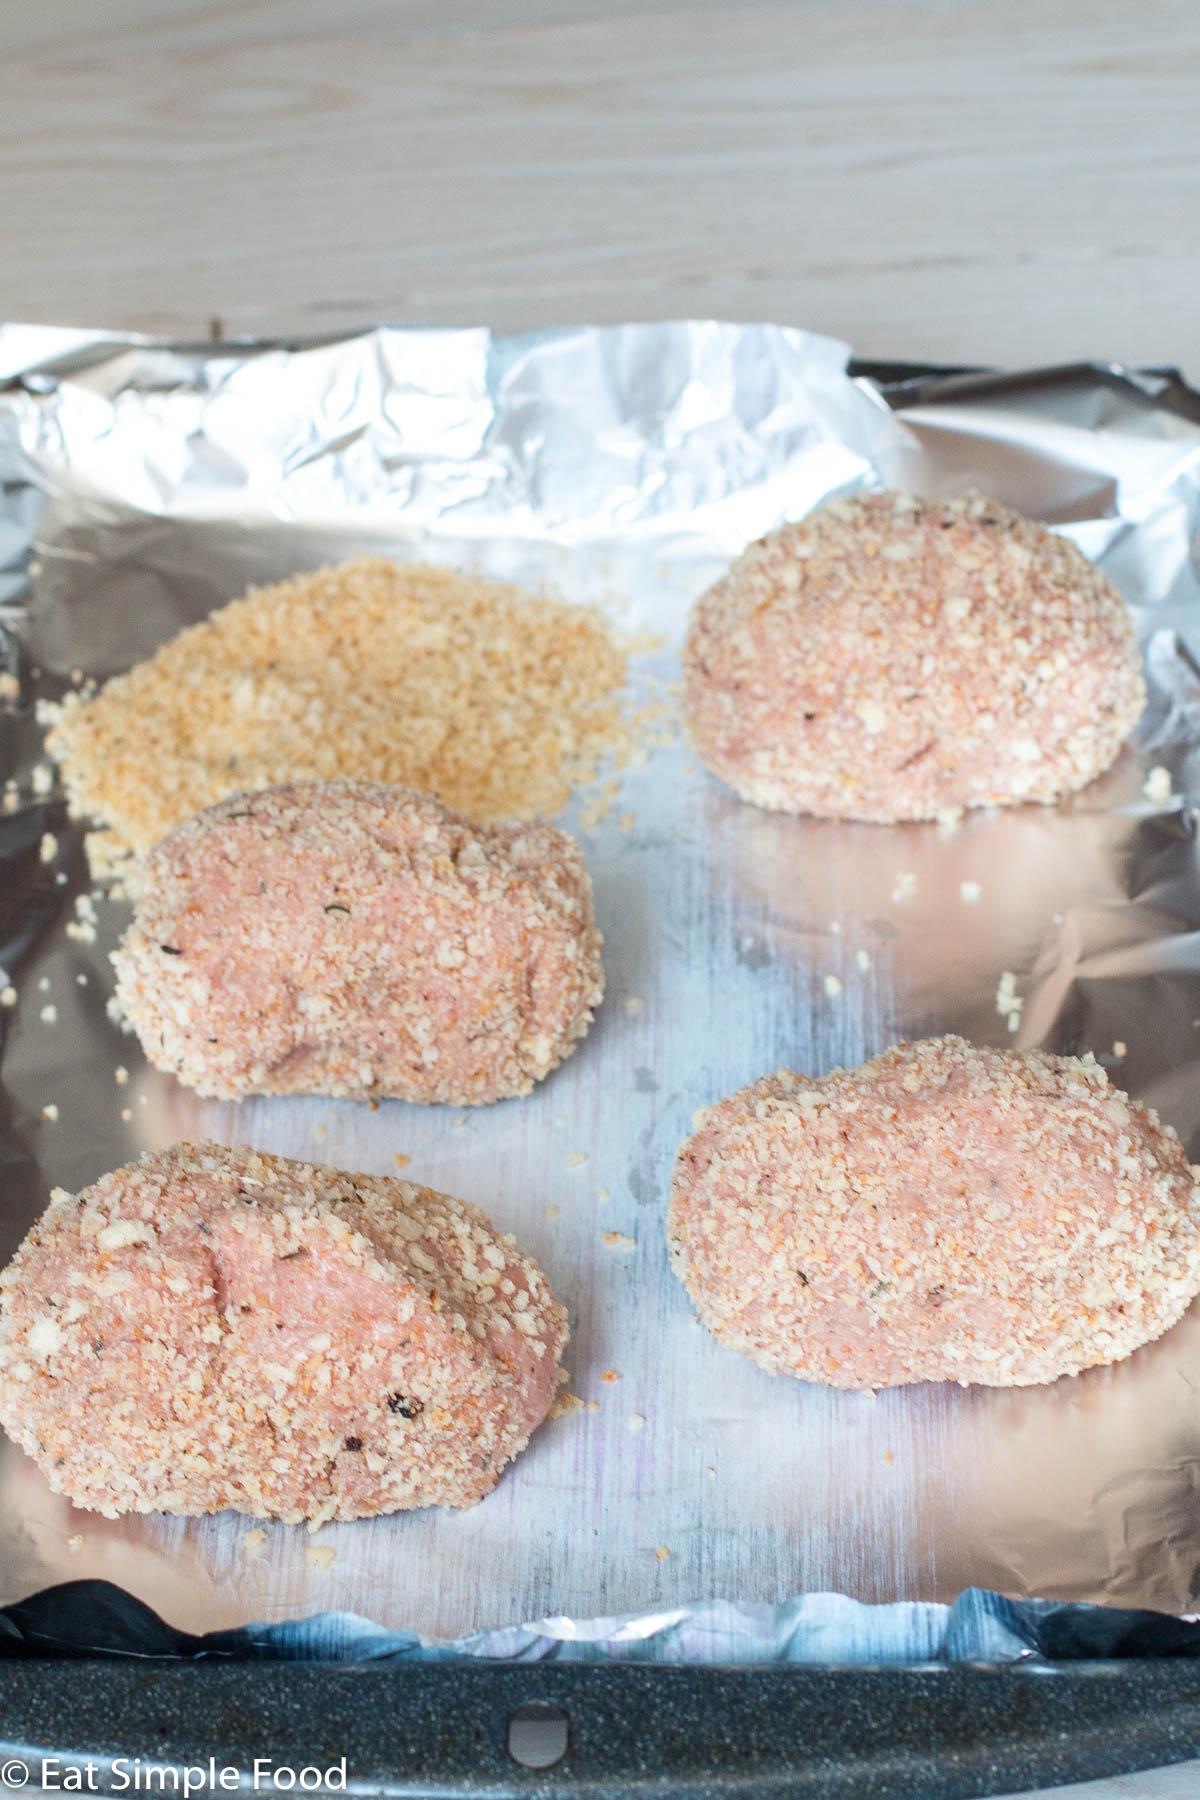 4 uncooked raw turkey scotch eggs on an aluminum lined baking sheet with breadcrumbs on it as well.